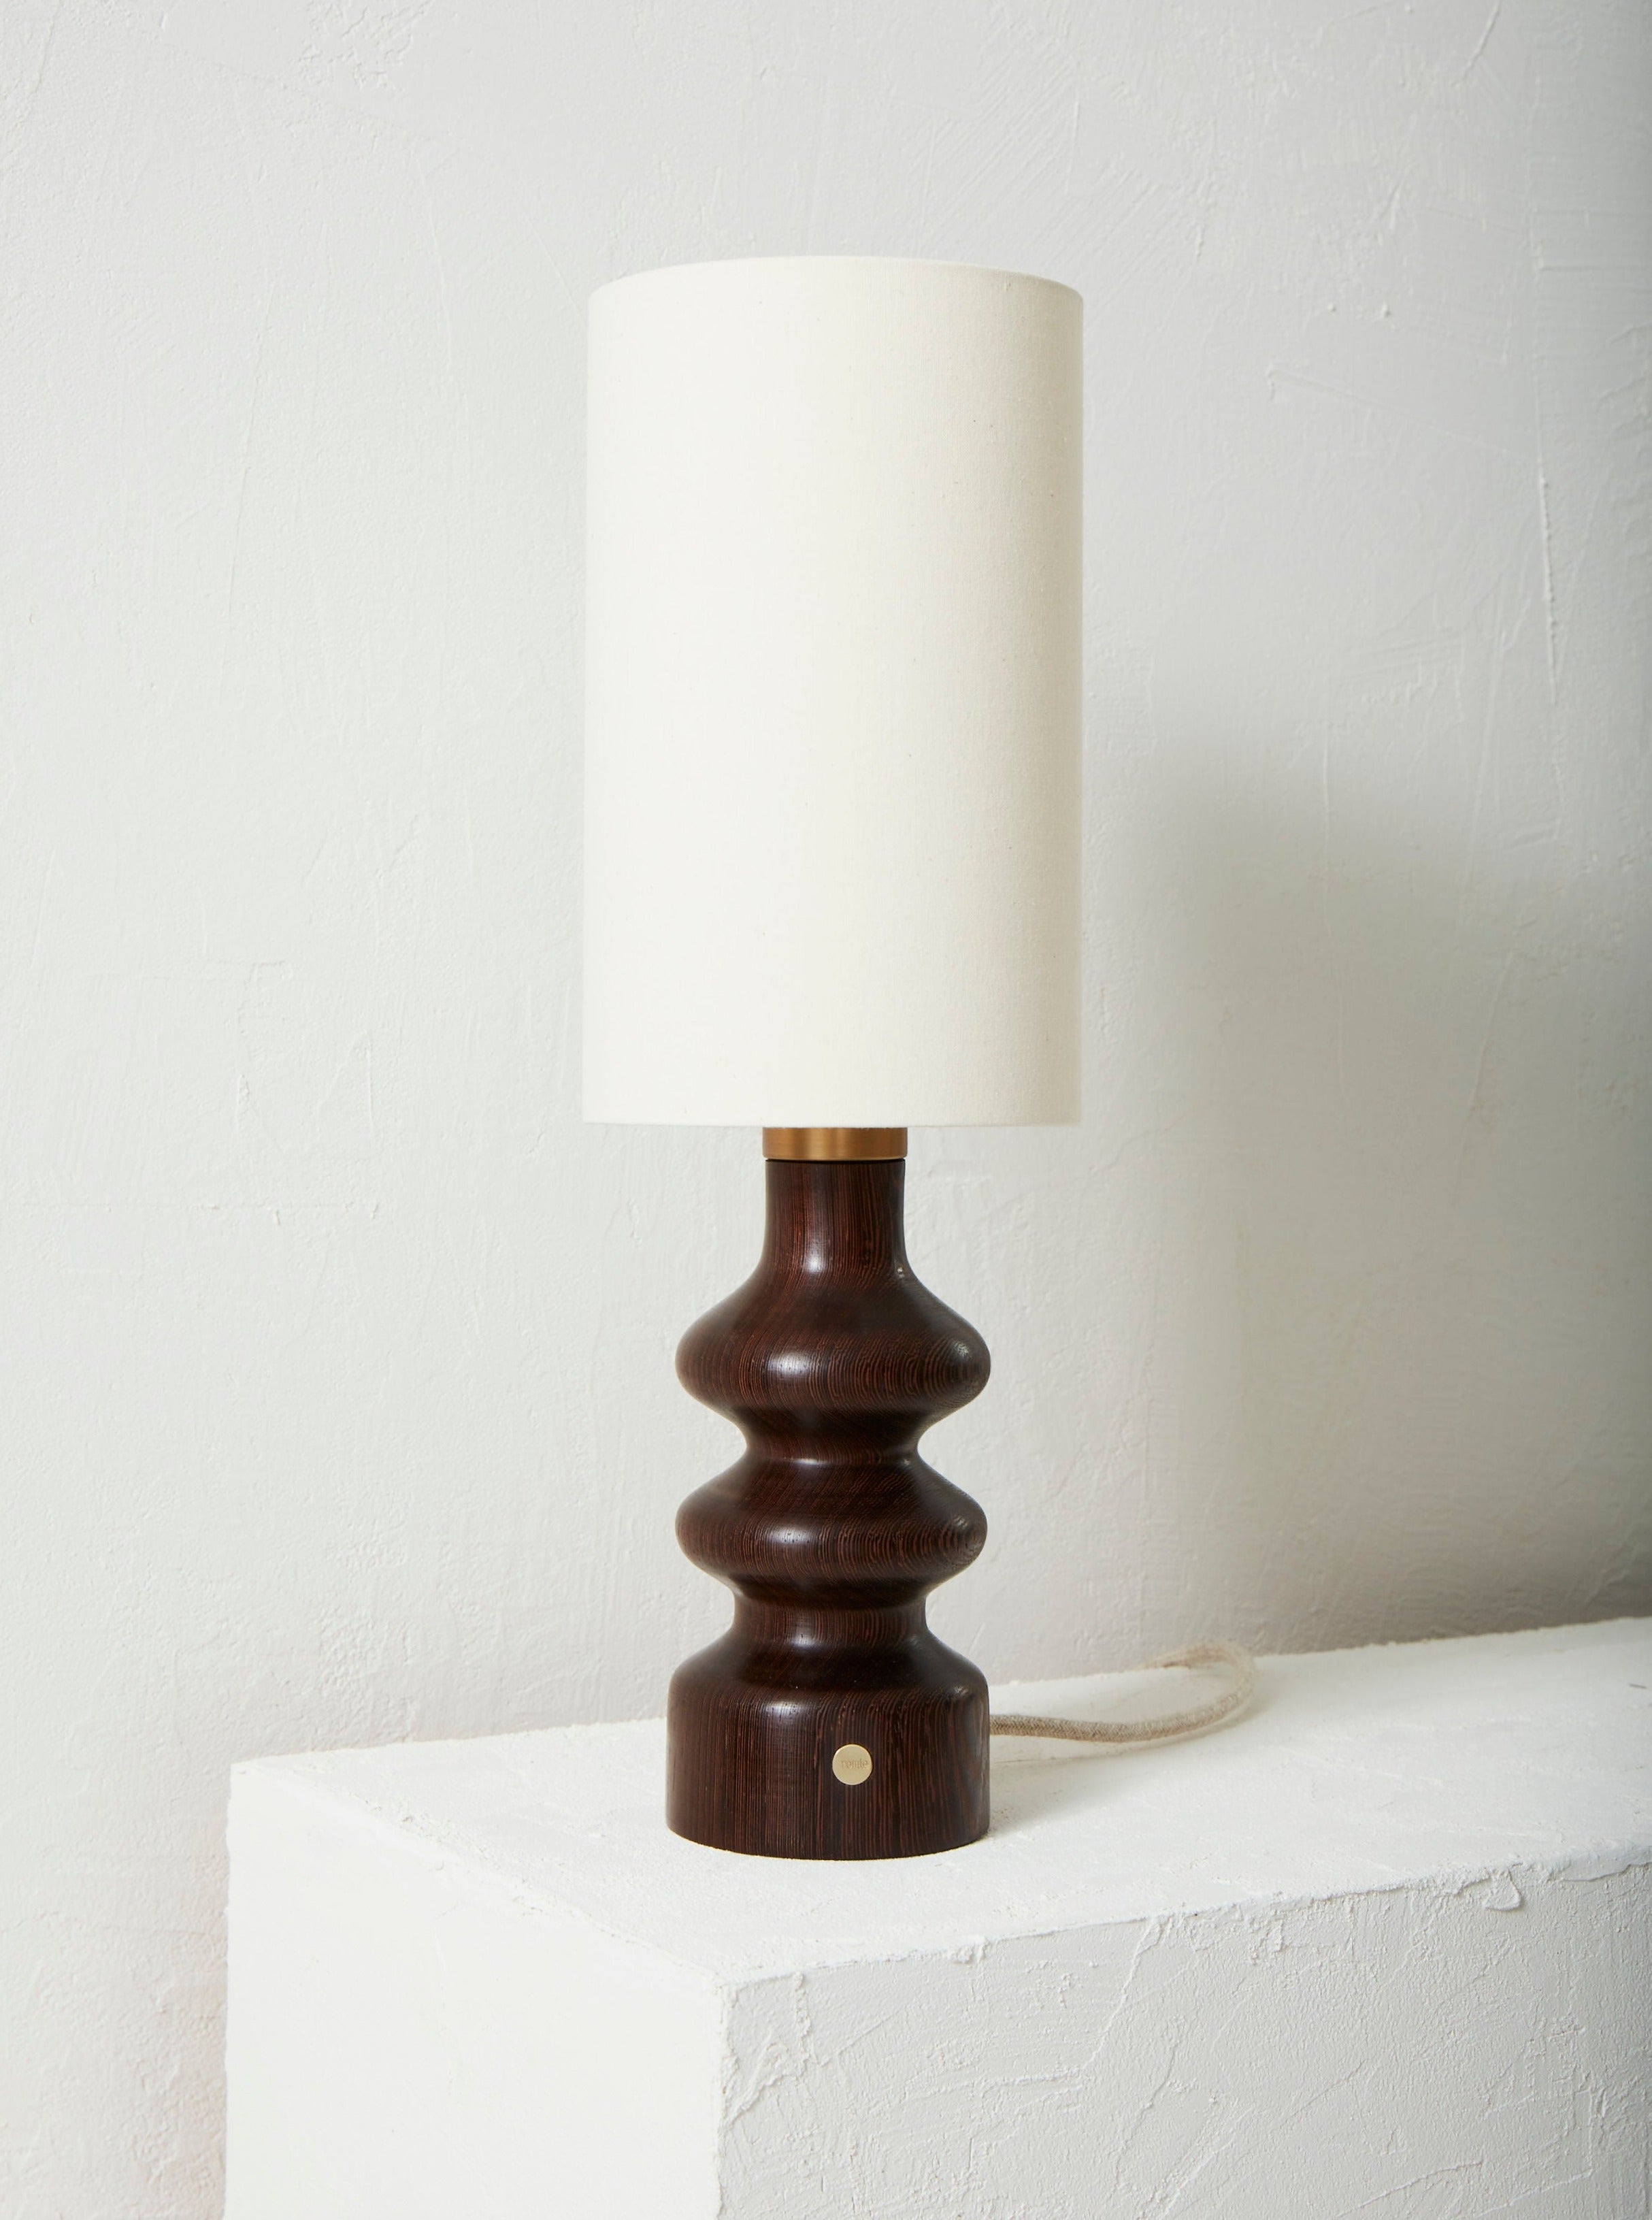 A Alma Wengé Lamp with a textured, wenge grain base and a plain white lampshade, standing on a white shelf against a textured white wall.